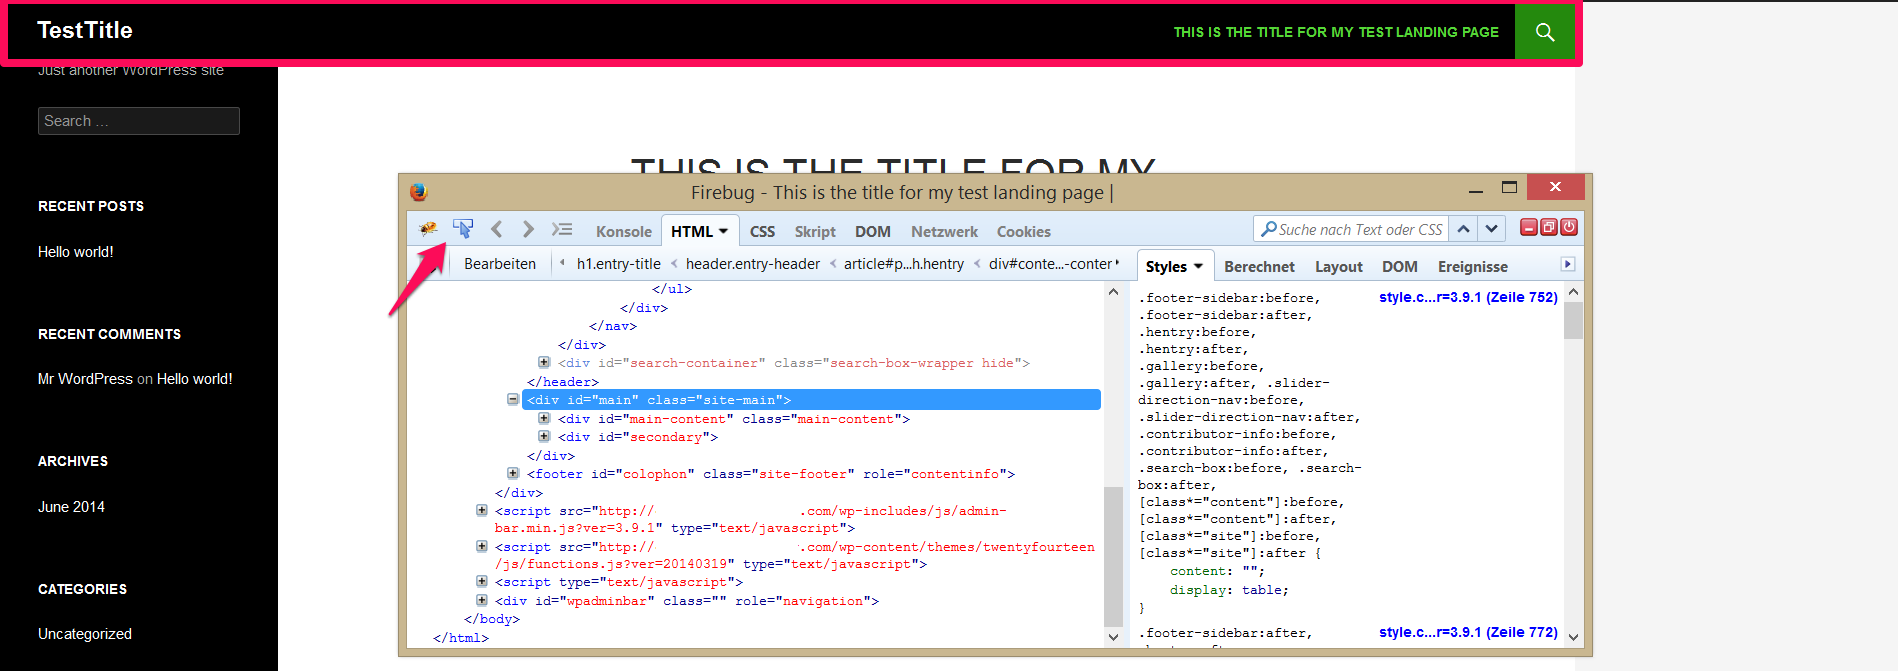 Inspect the site's element using Firebug